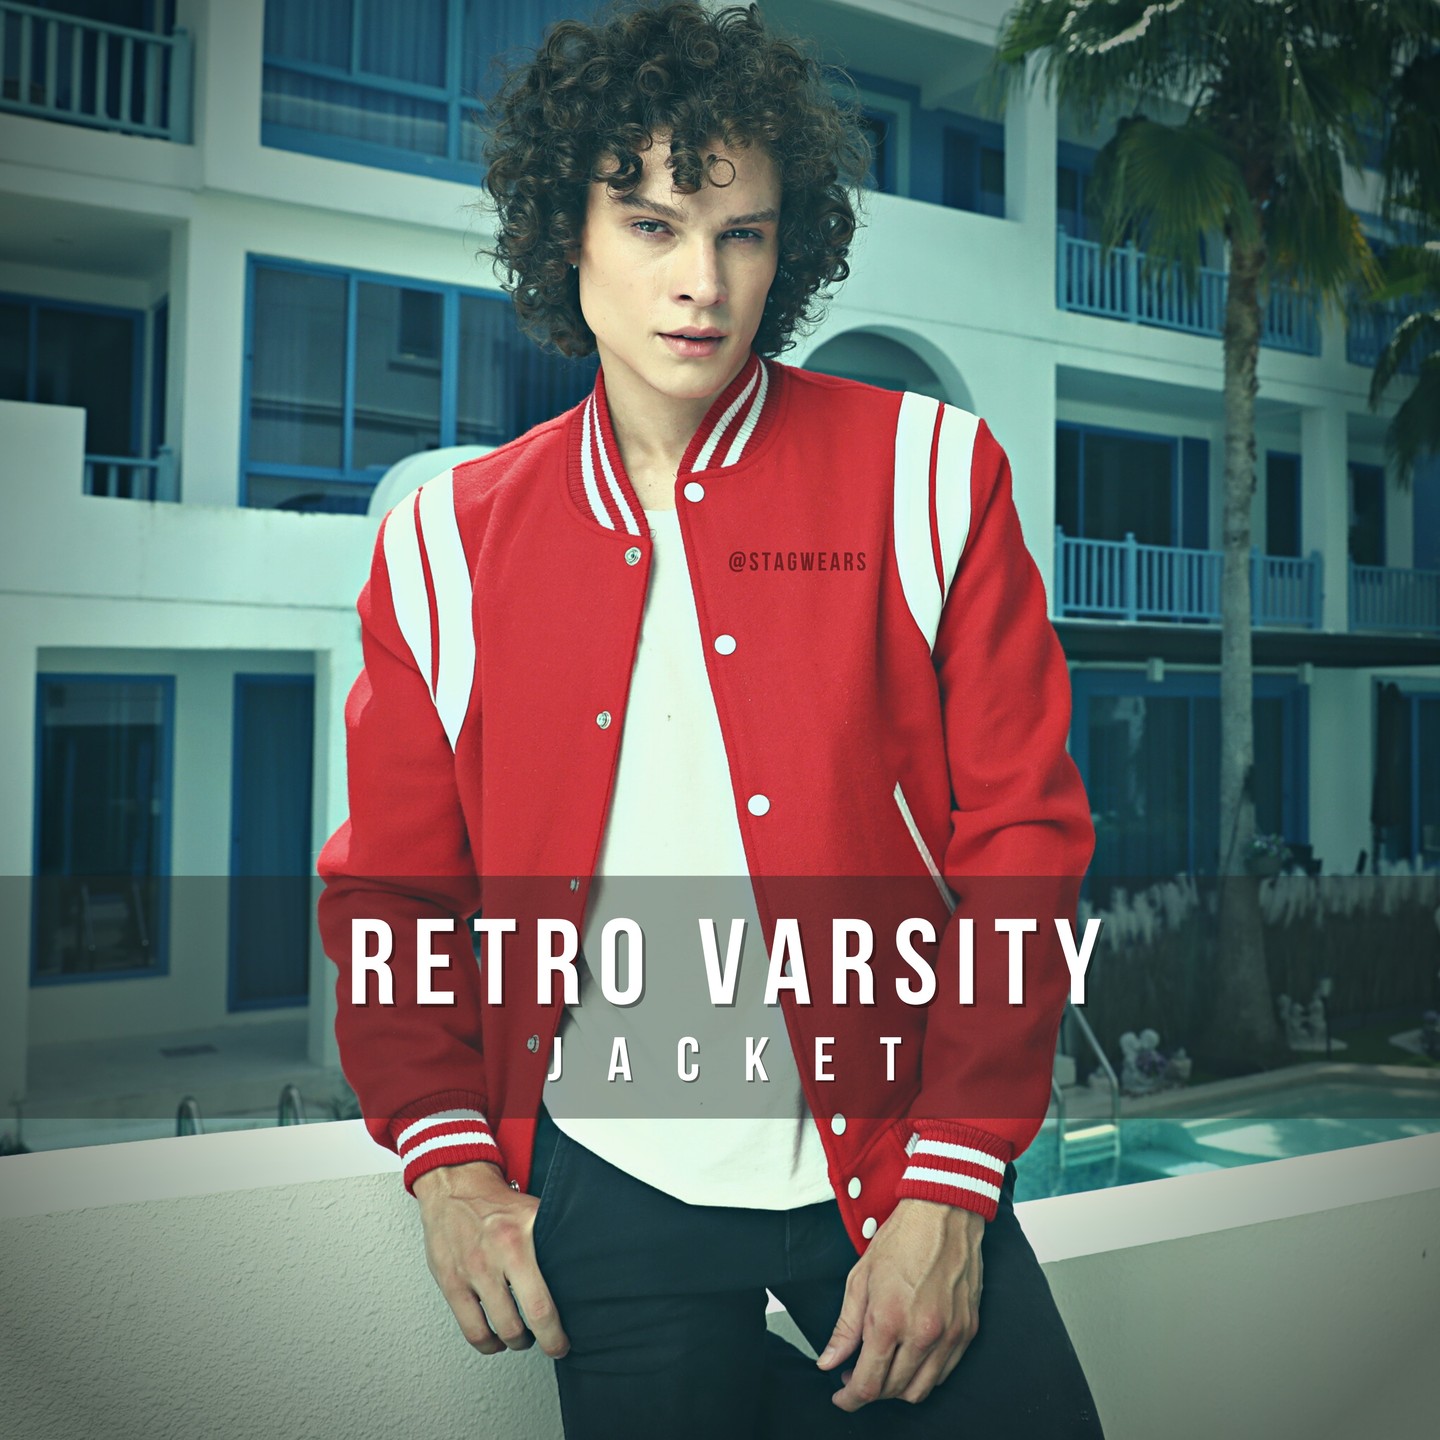 A timeless classic for a new era🔥
Keep your style classic with our Retro Varsity! 
Customize by yourself and make it uniquely yours. #customizeit  #varsity#varsityjacket#letterman#lettermanjacket#retro#customjackets #stagwears